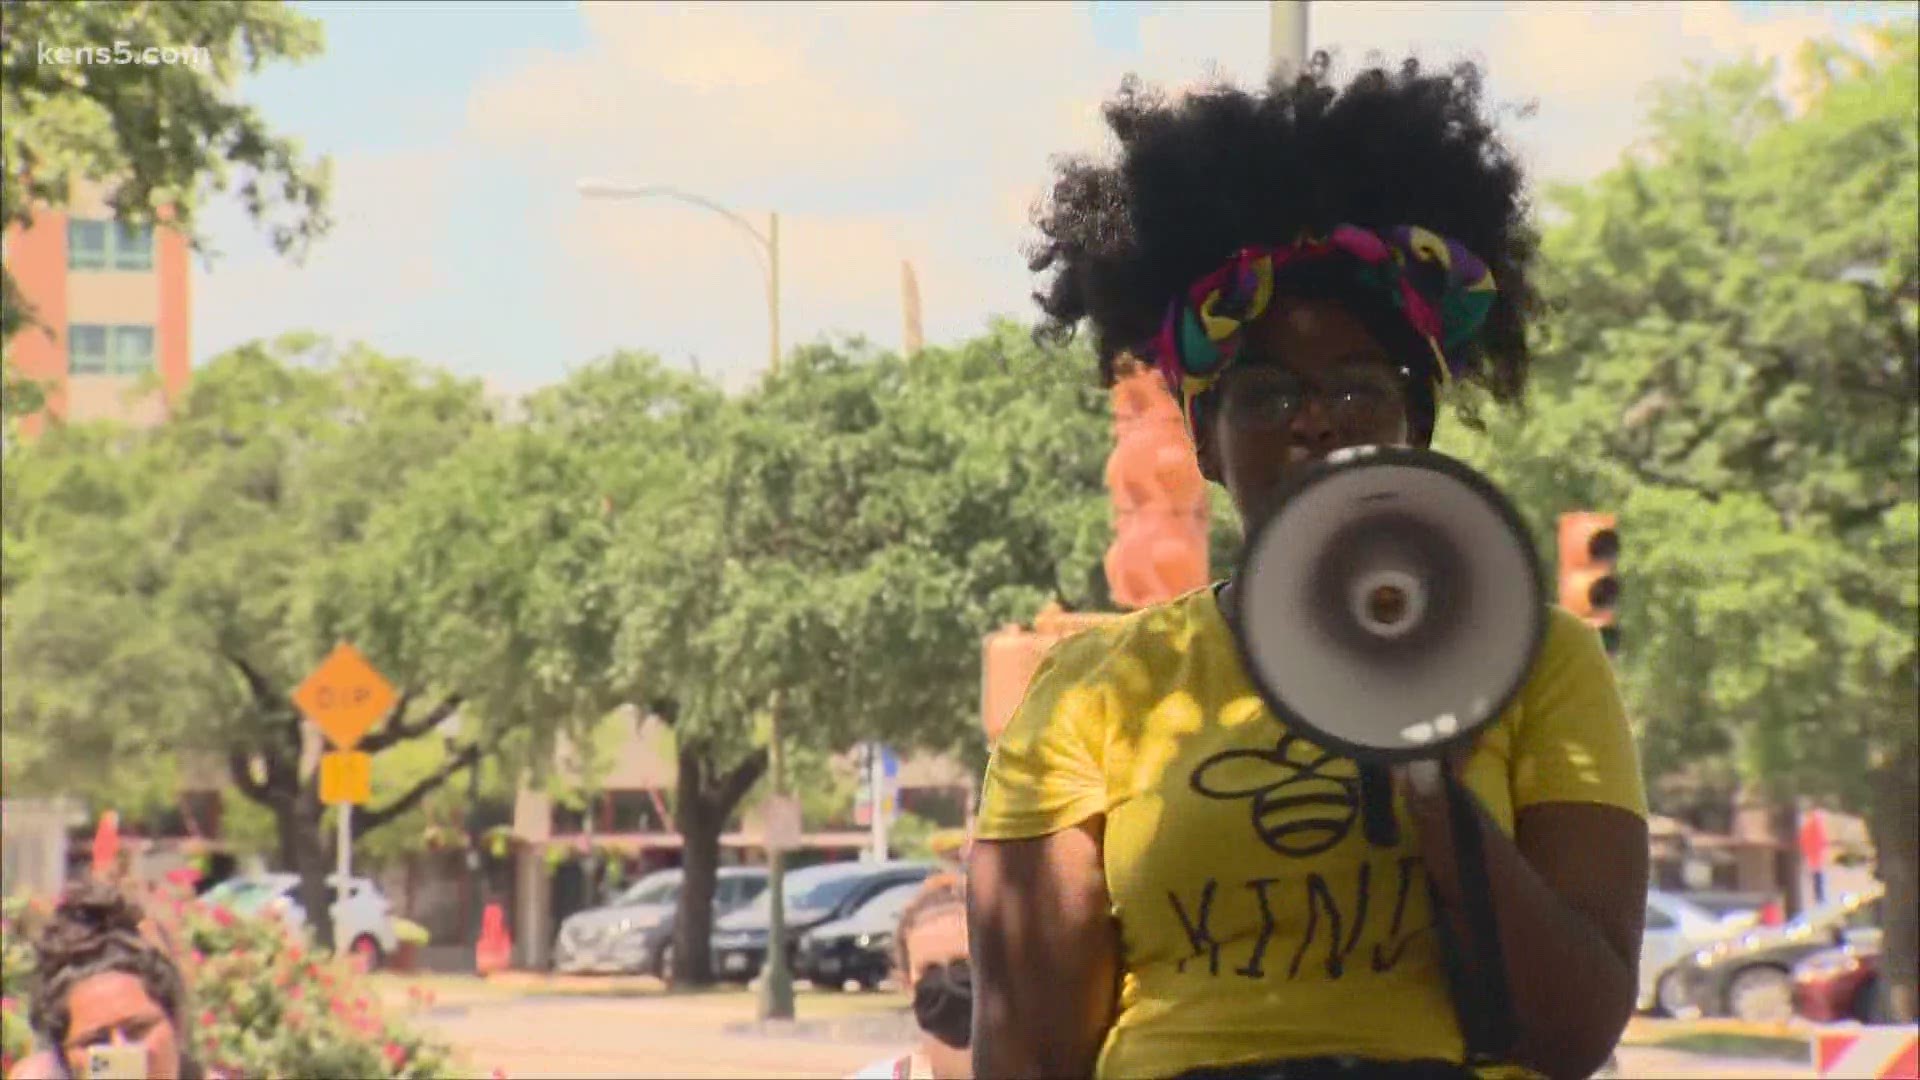 San Antonio has seen another day of peaceful protests. Saturday, the city decided to lift the temporary curfew that had been in place for a week.